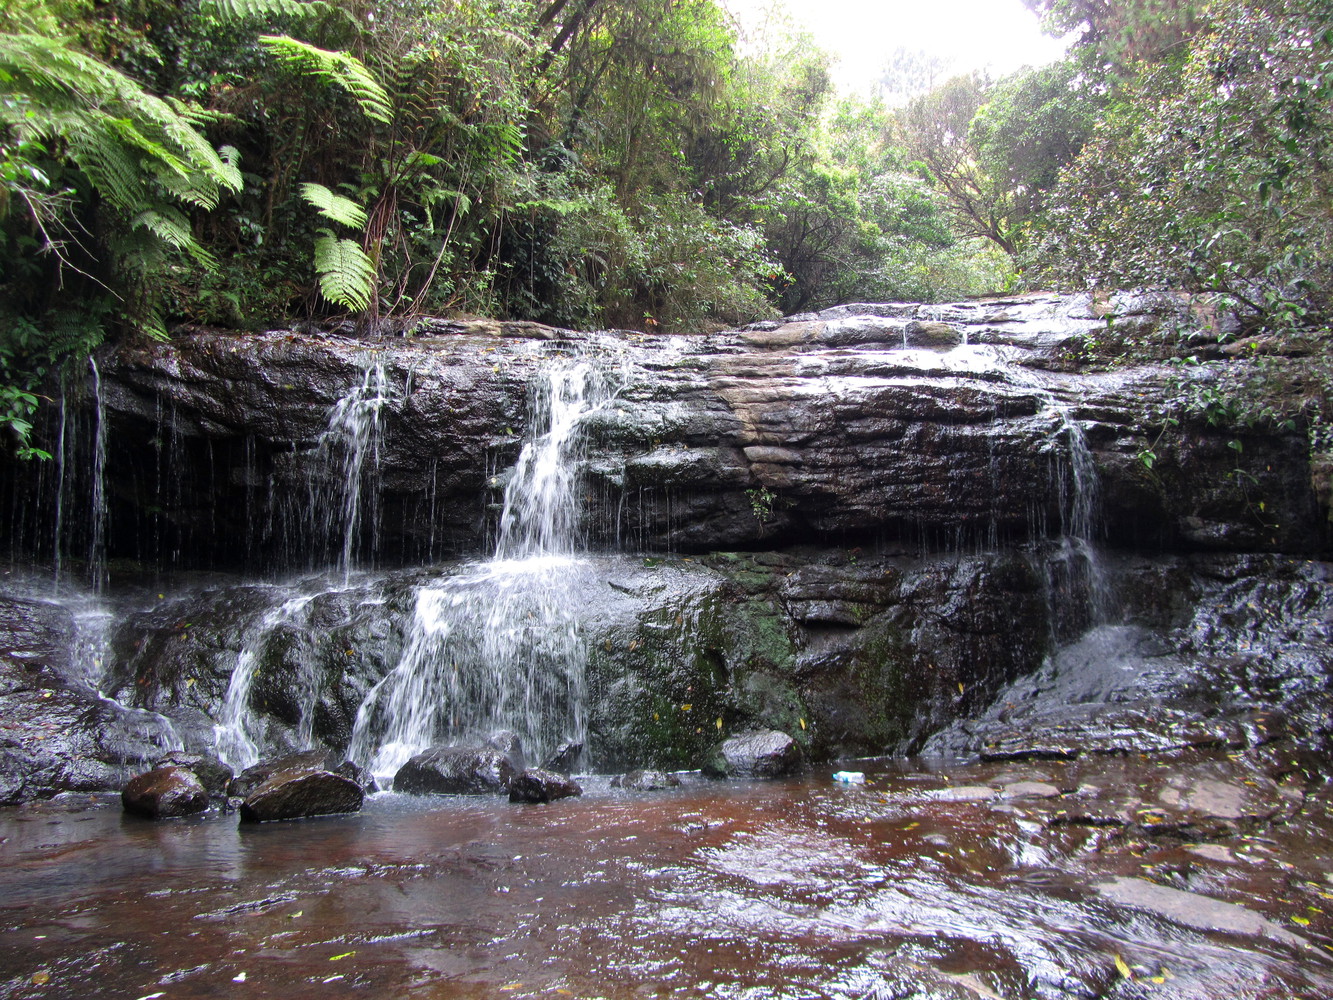 A waterfall descending a series of two large rock steps